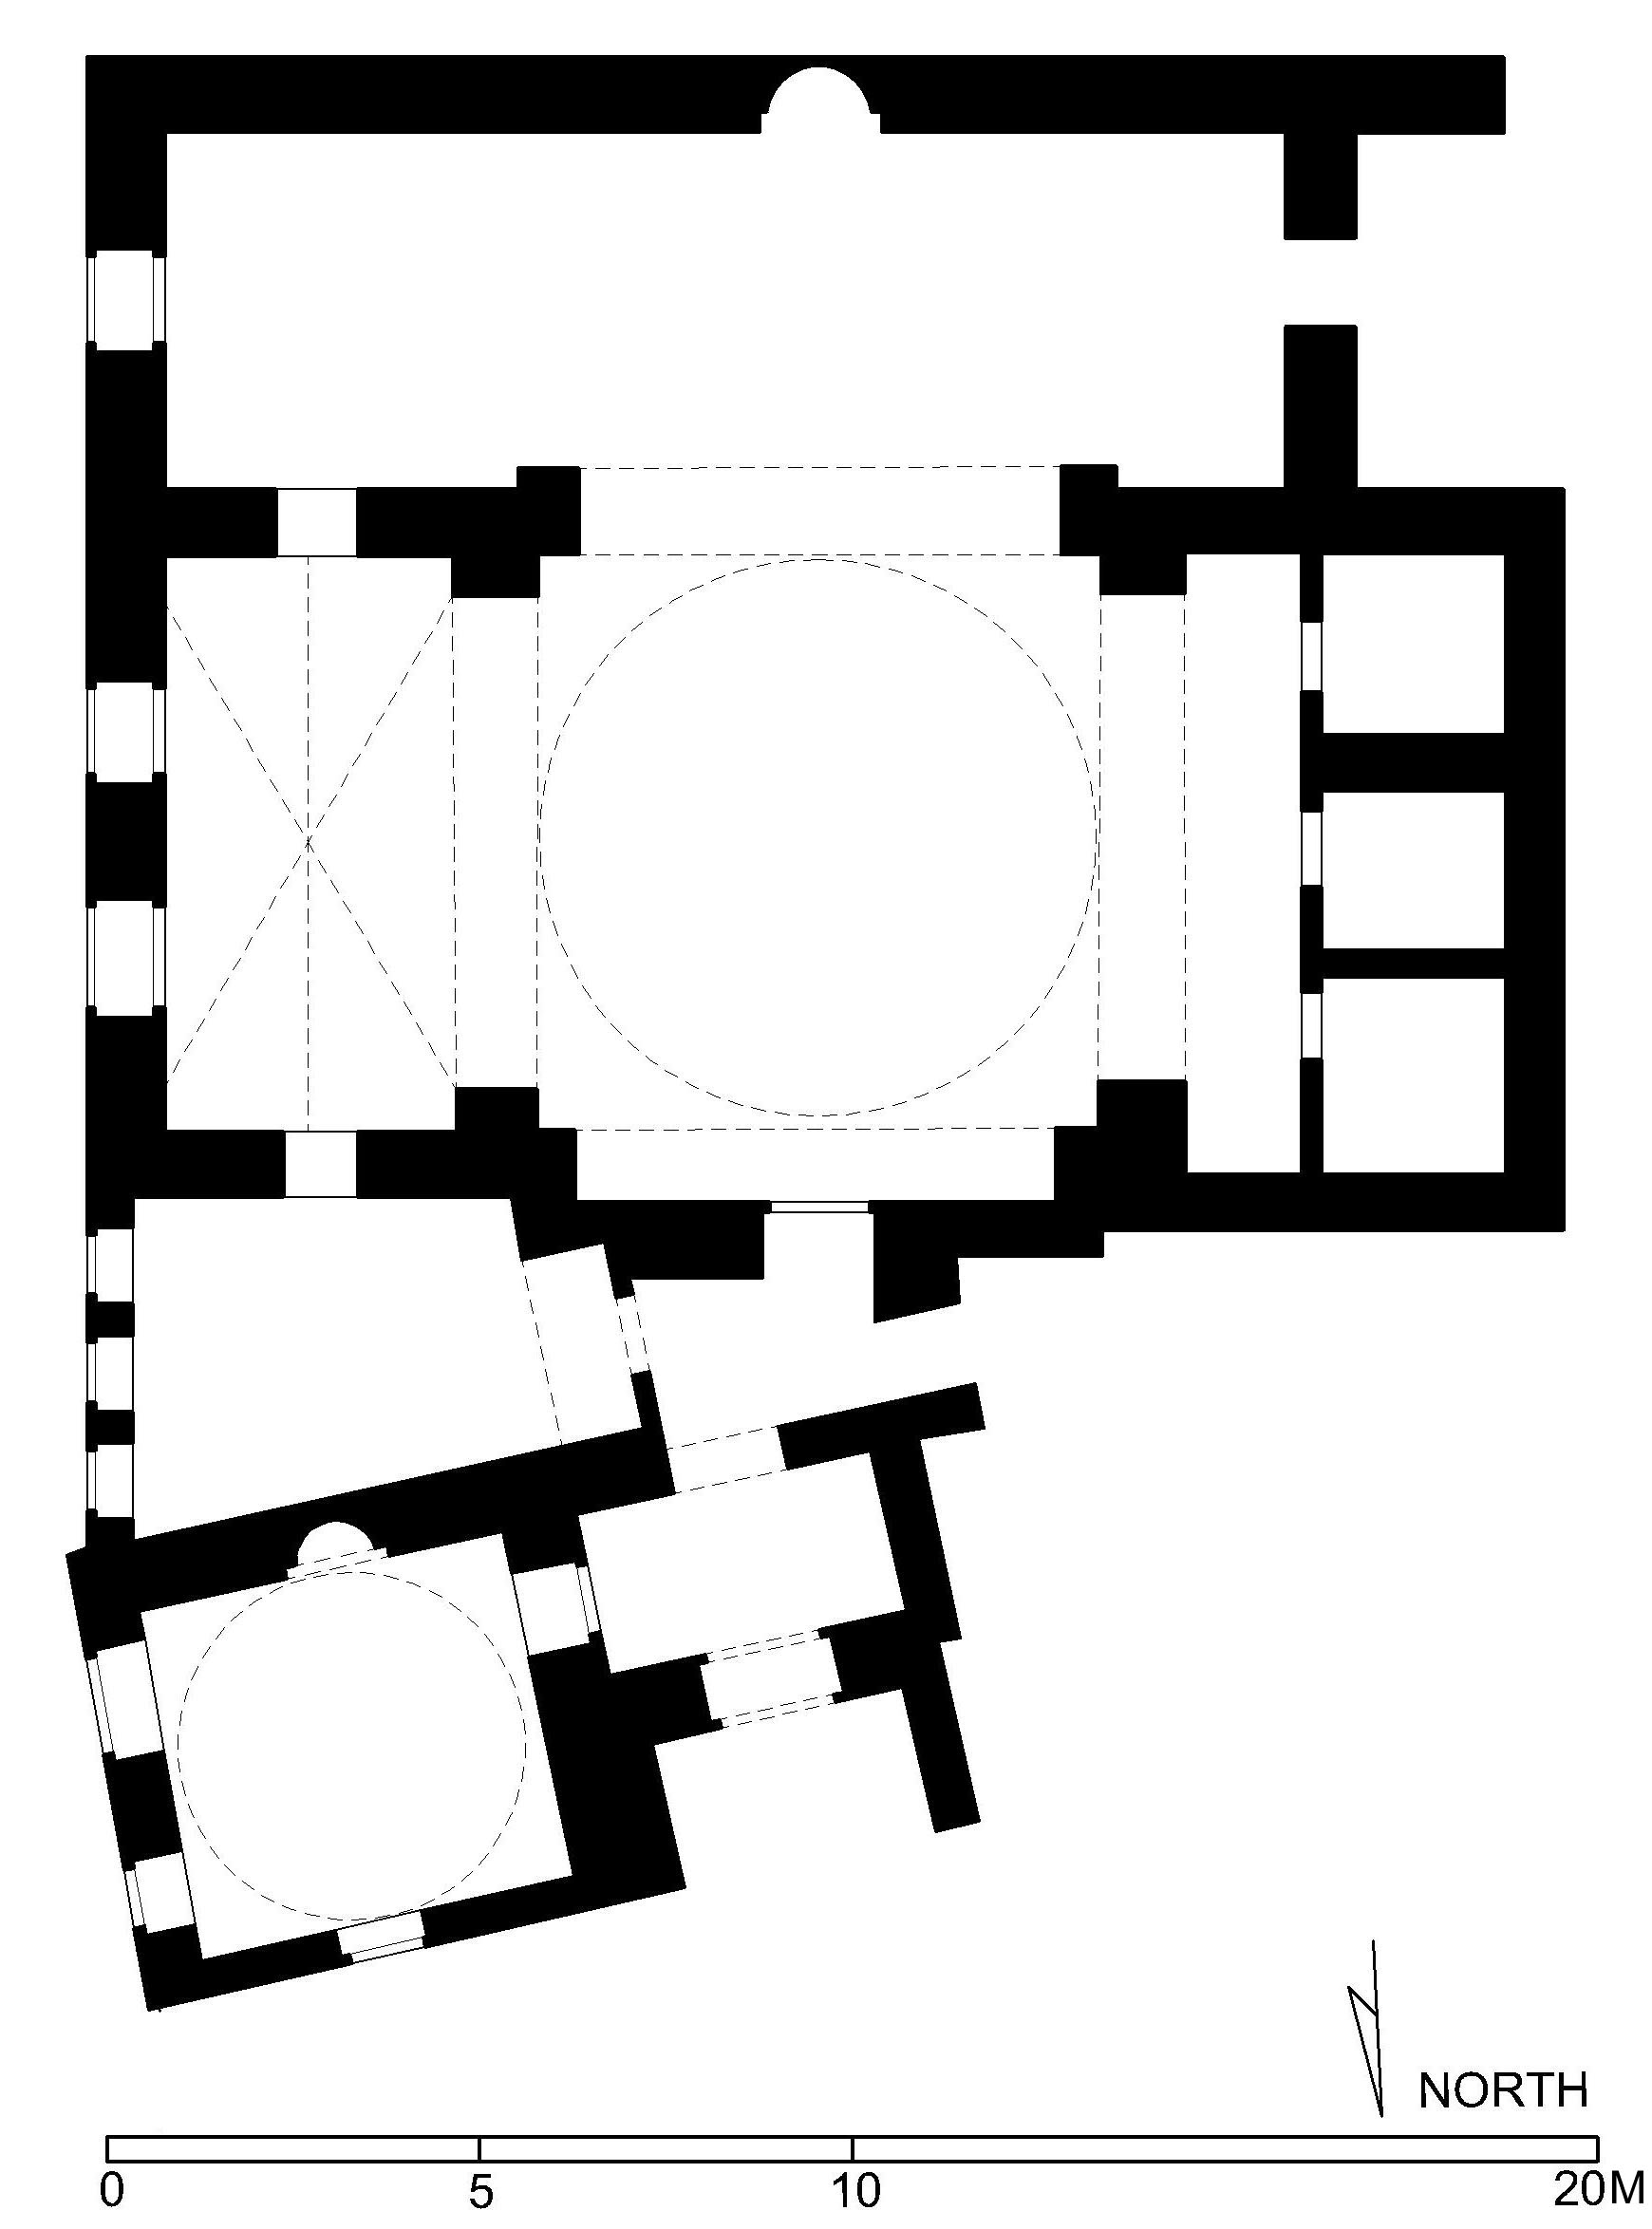 Saeed Arida - Floor plan of complex (after Meinecke) in AutoCAD 2000 format. Click the download button to download a zipped file containing the .dwg file. 